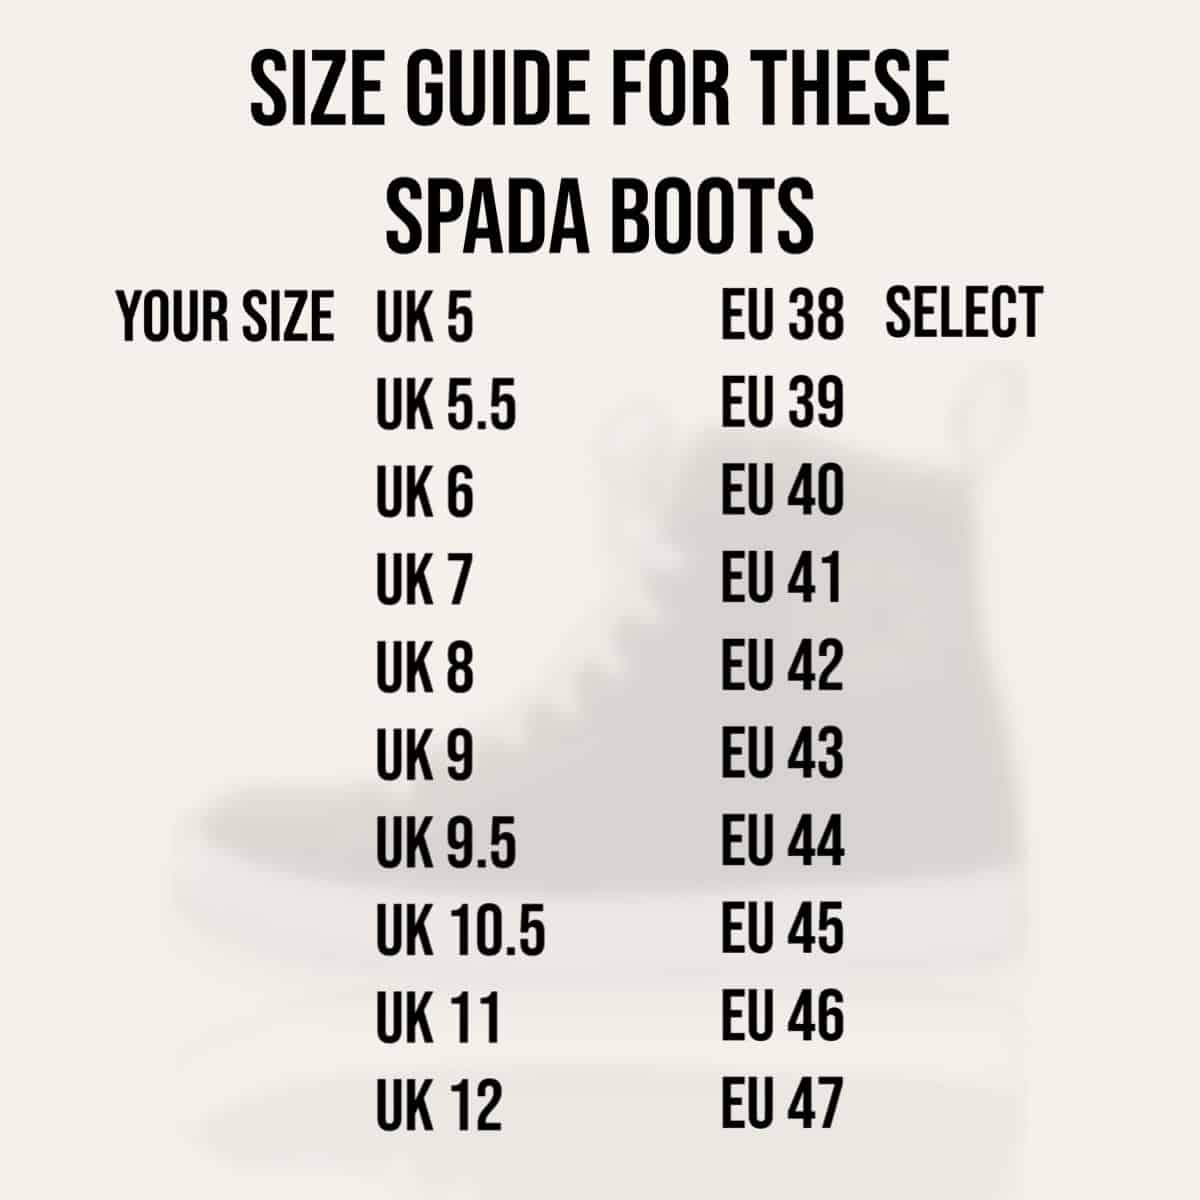 Spada Strider Pro CE WP Boots: Casual style motorcycle boots with road & weather size guide